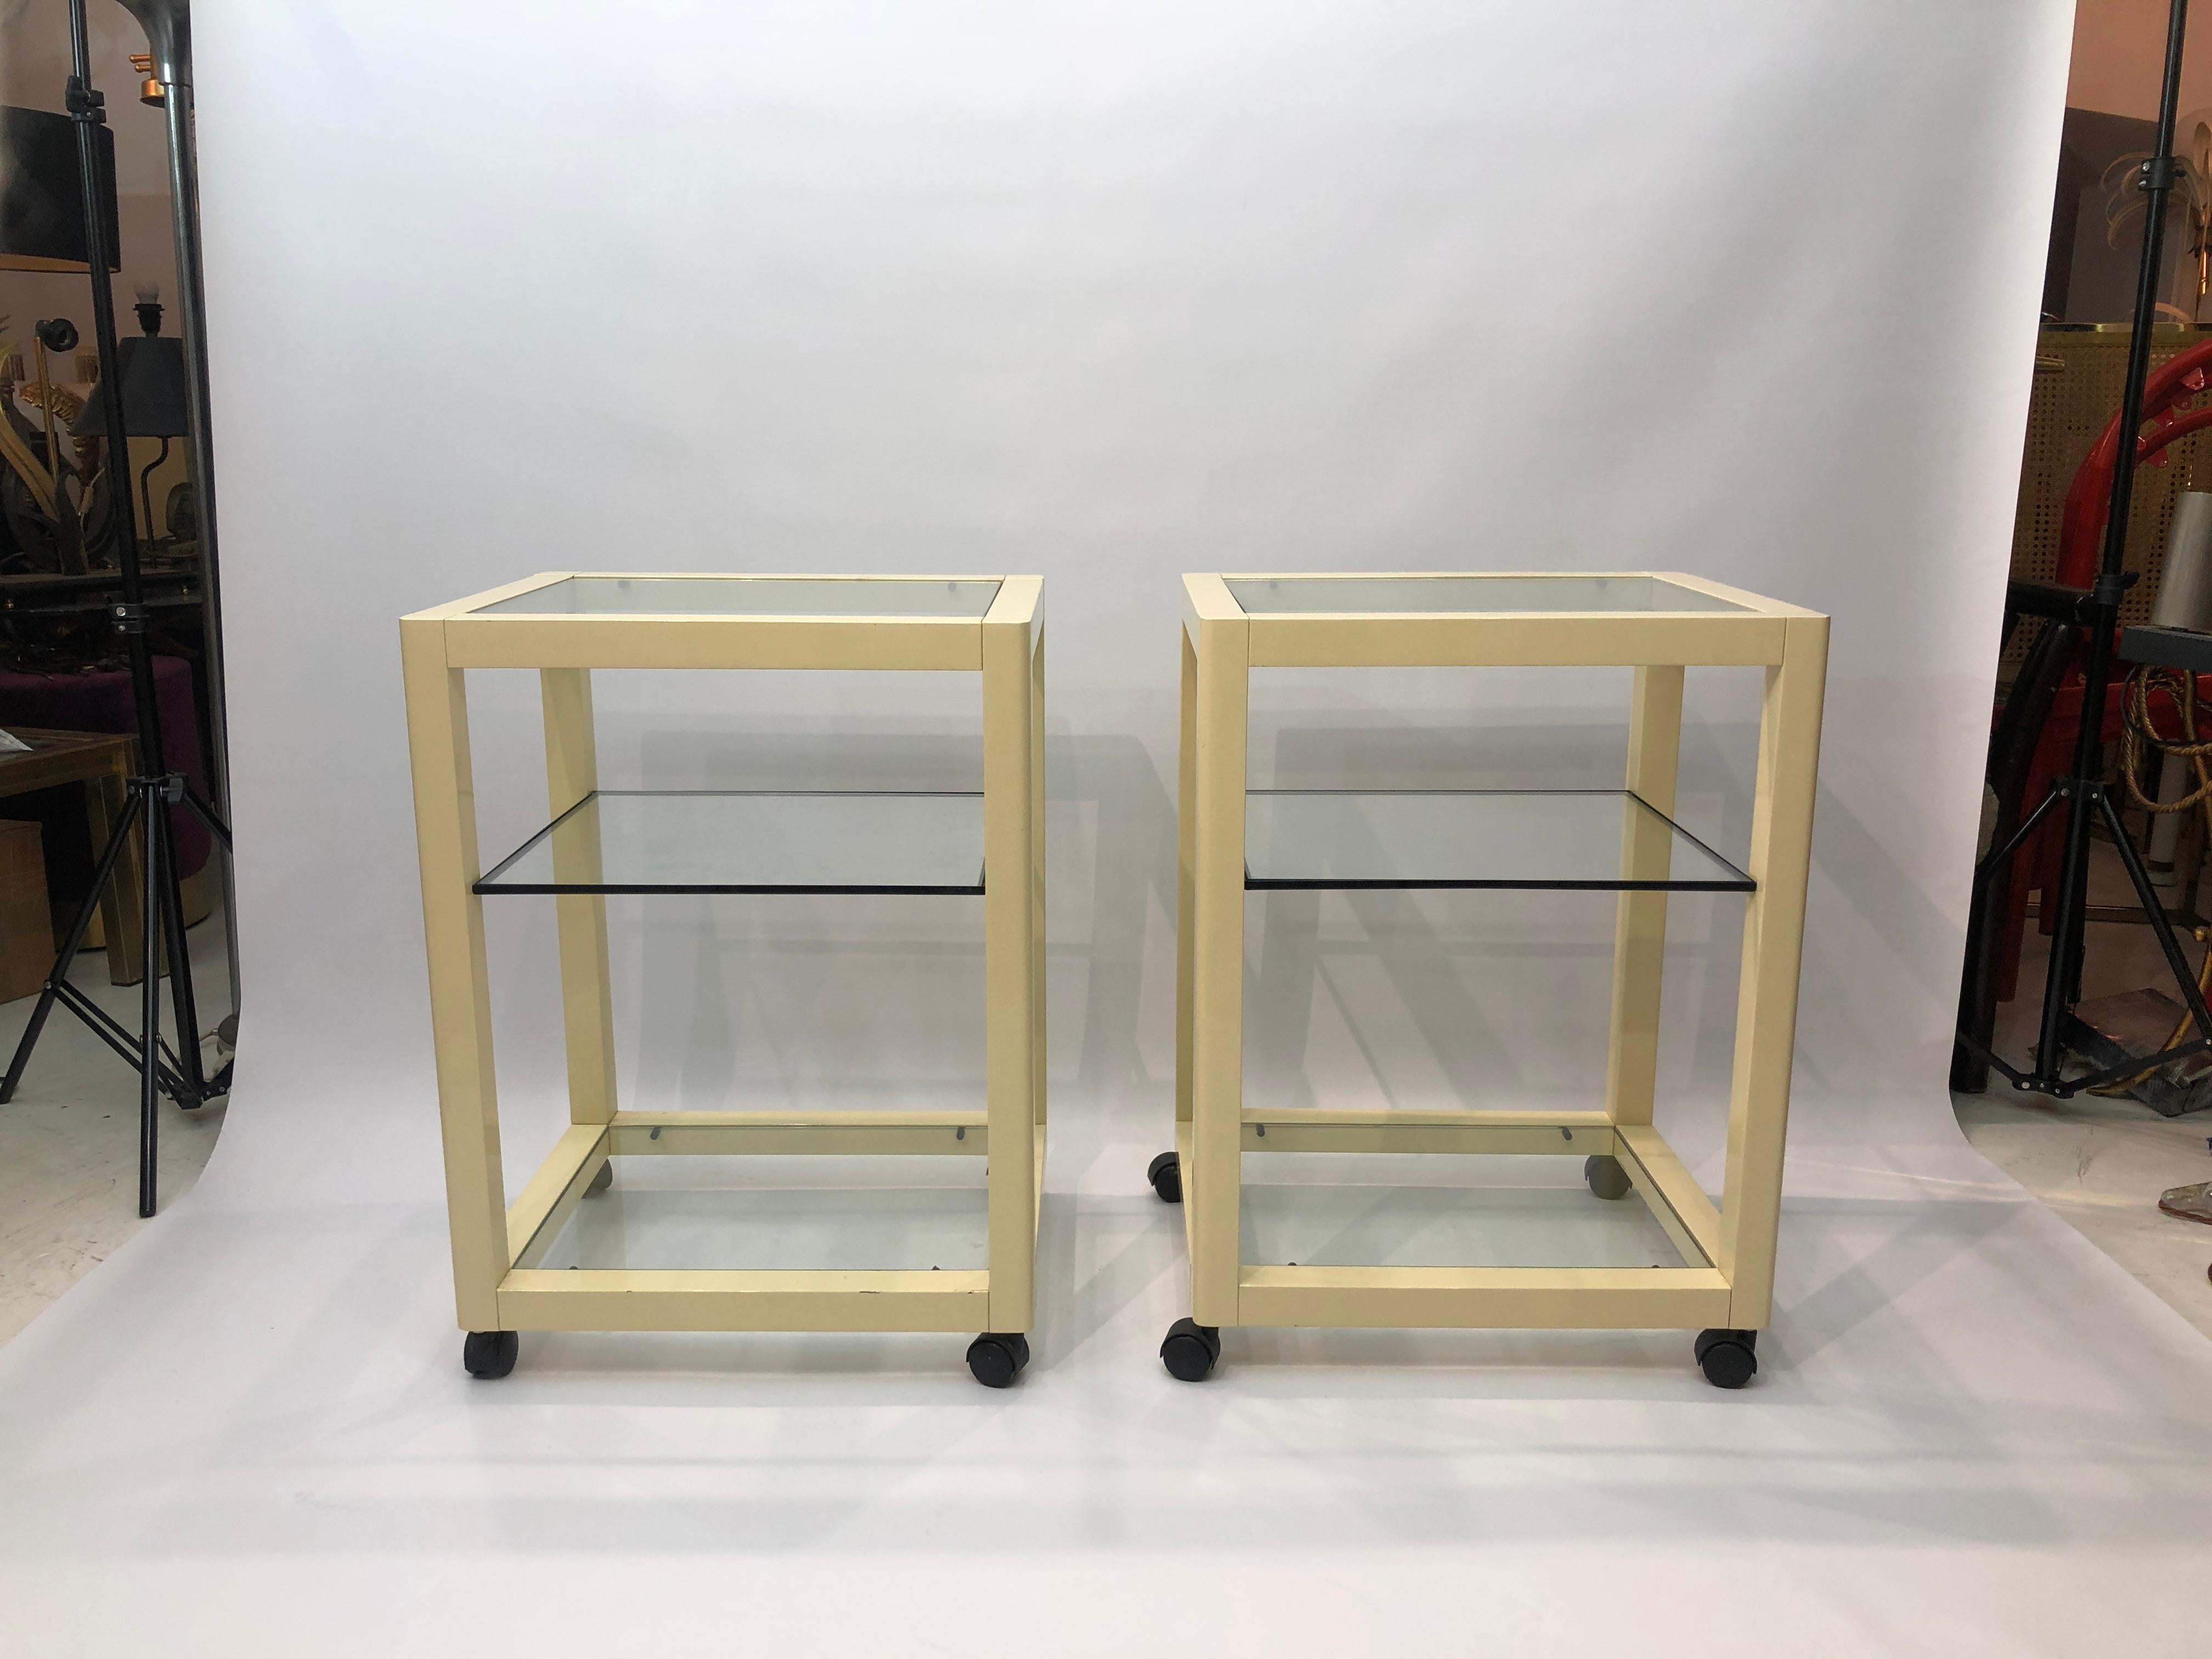 A pair of effortlessly chic side tables, made of lacquered metal and sat atop castor wheels.
 Each table is composed of a cream lacquered frame, inside which is housed three glass panes; two secured firmly at the top and bottom and one 